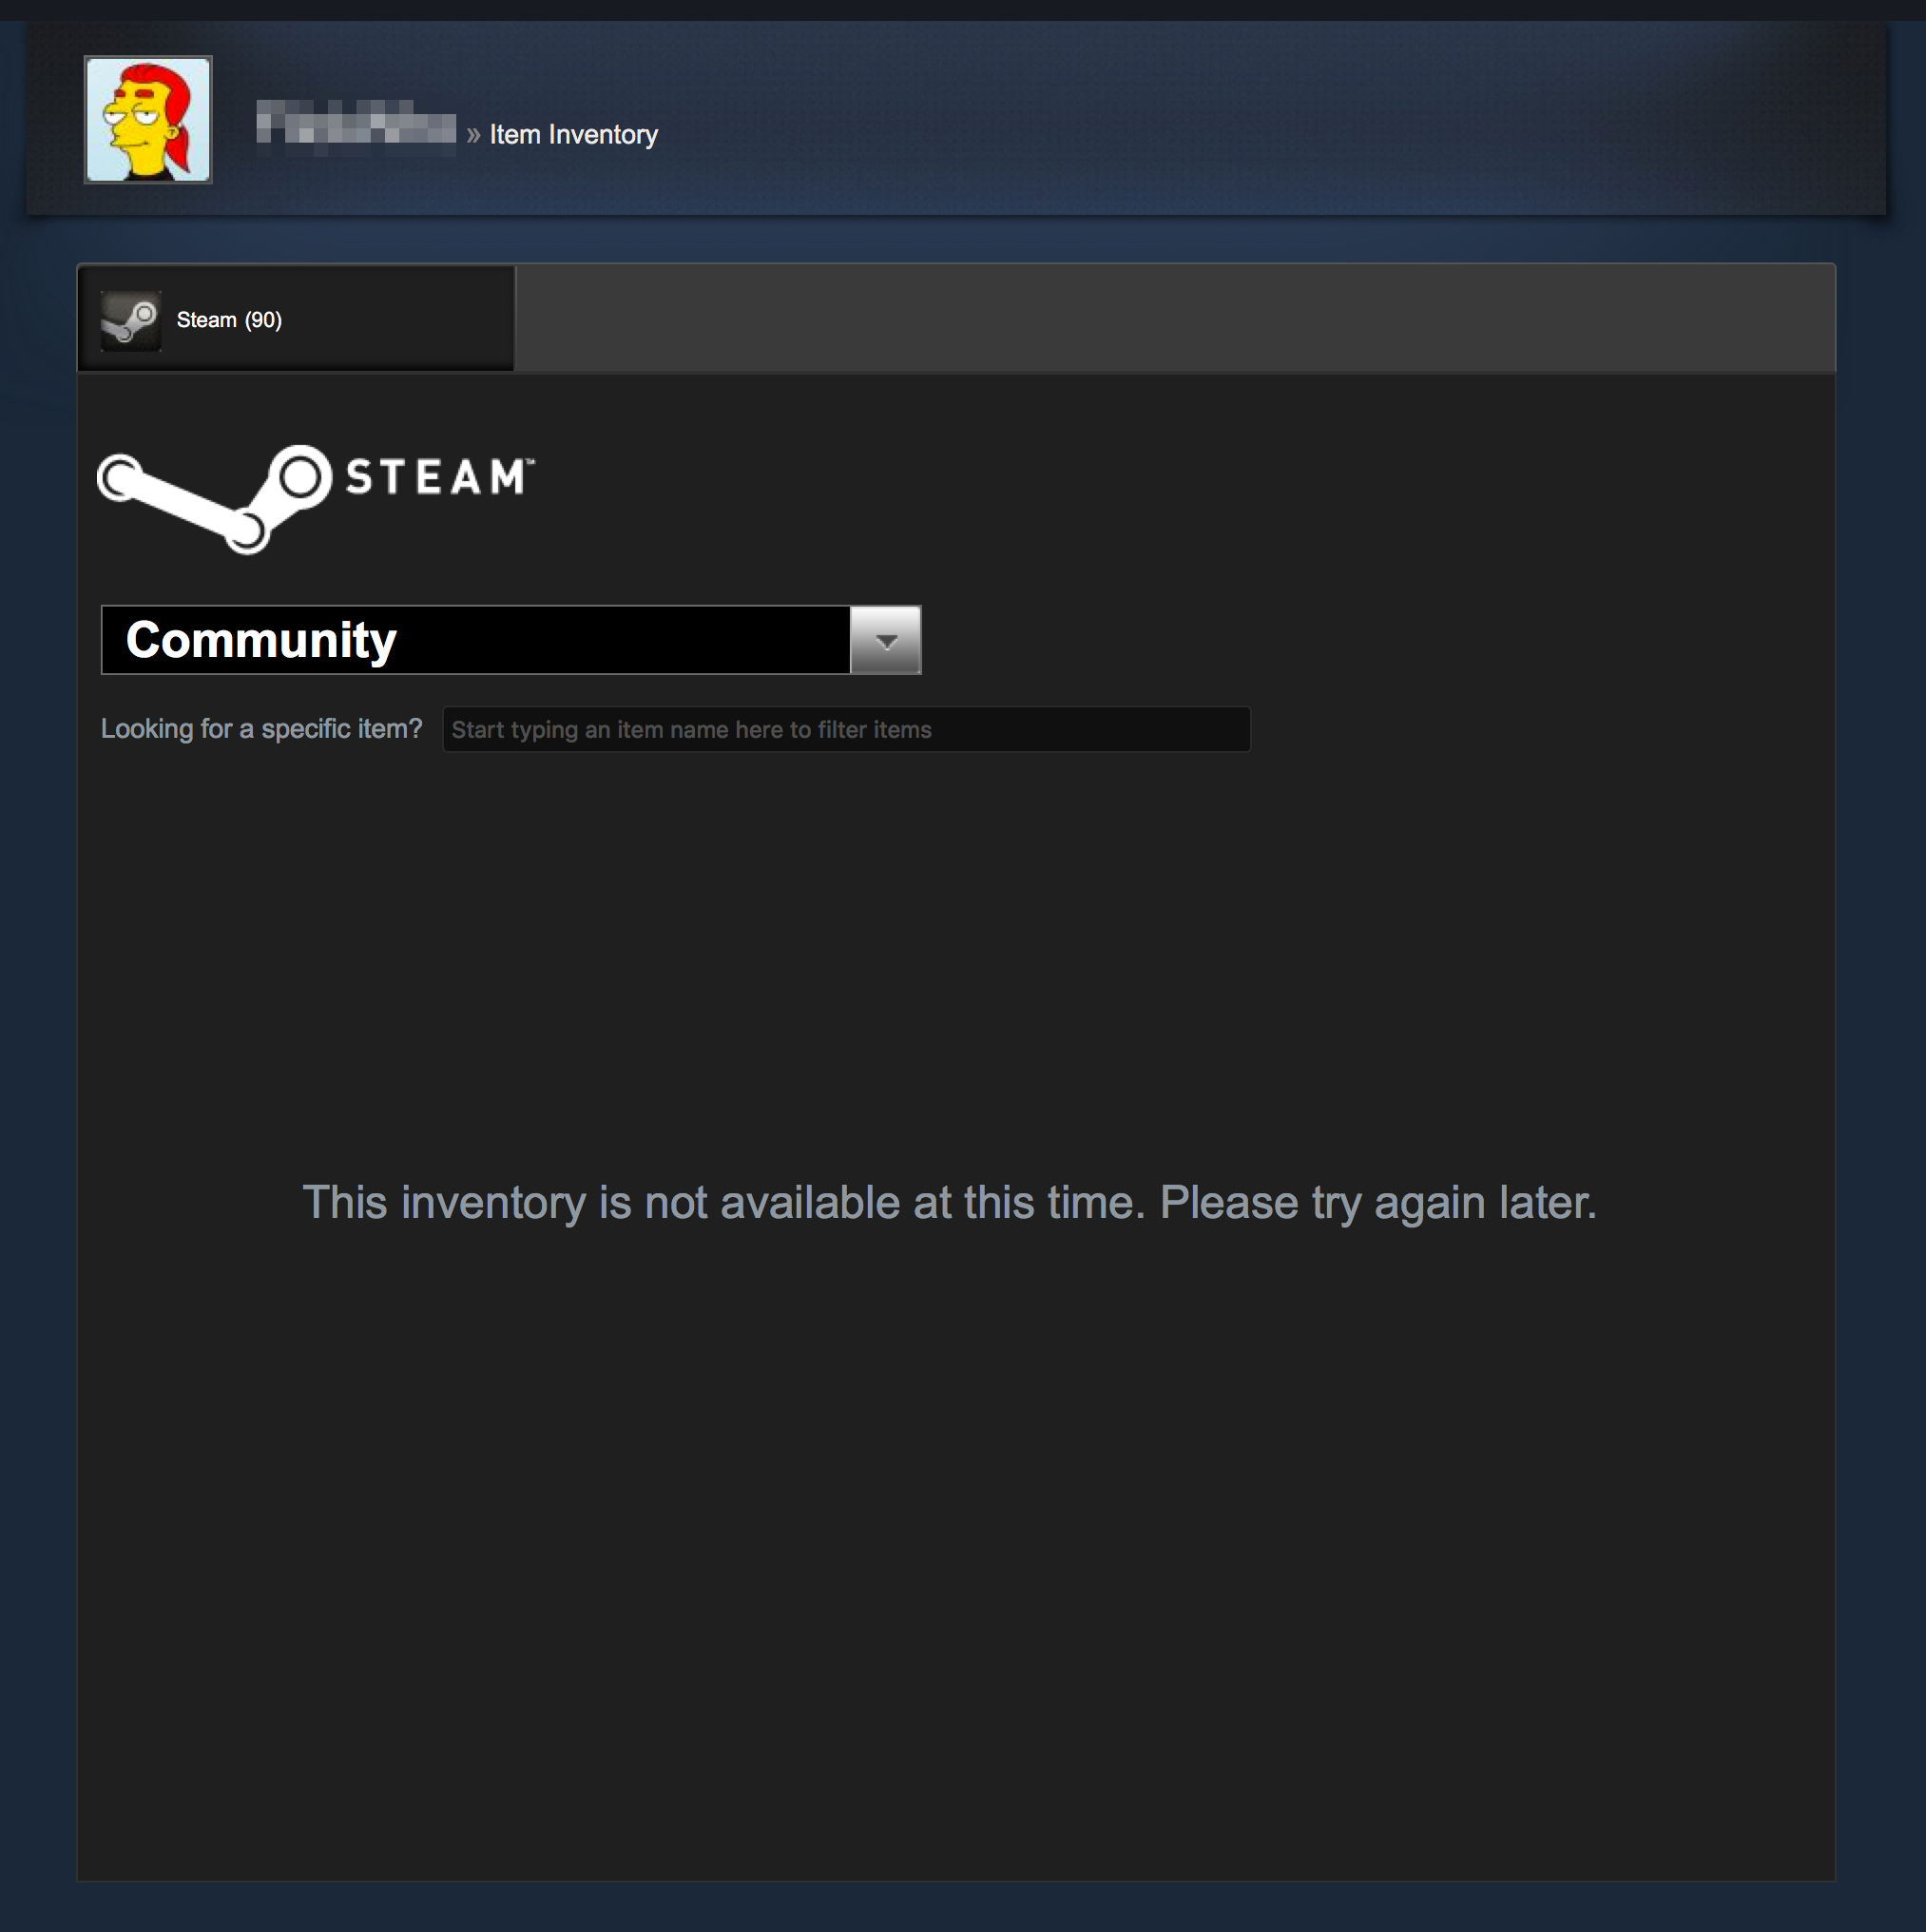 You didn't think I'd tell you my Steam name, did you?